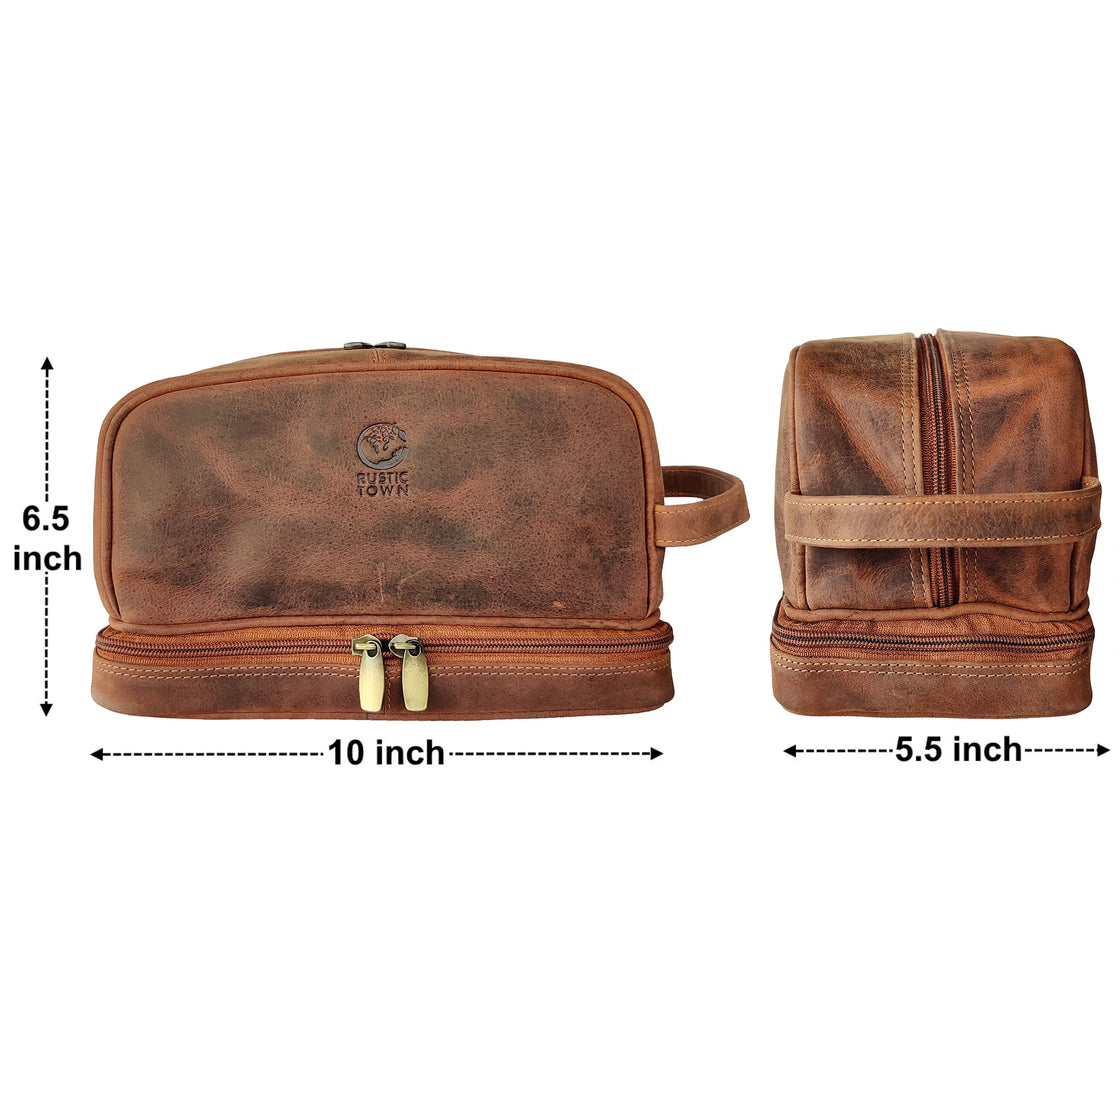 leather toiletry bag